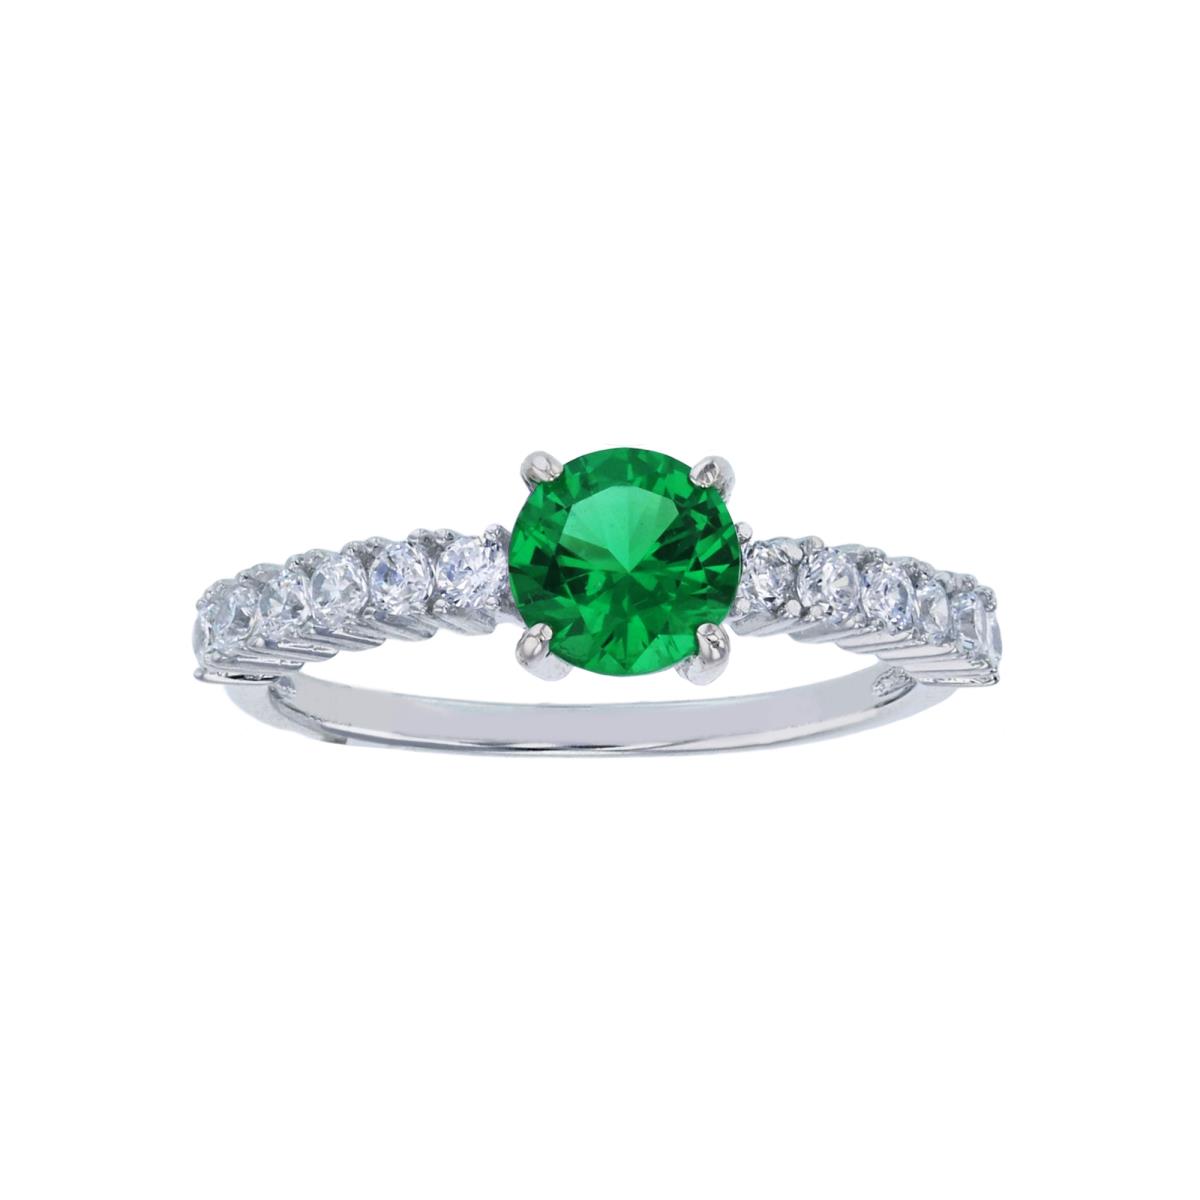 Sterling Silver Rhodium Centered 6mm Green Round & White Stone Pave Engagement Ring